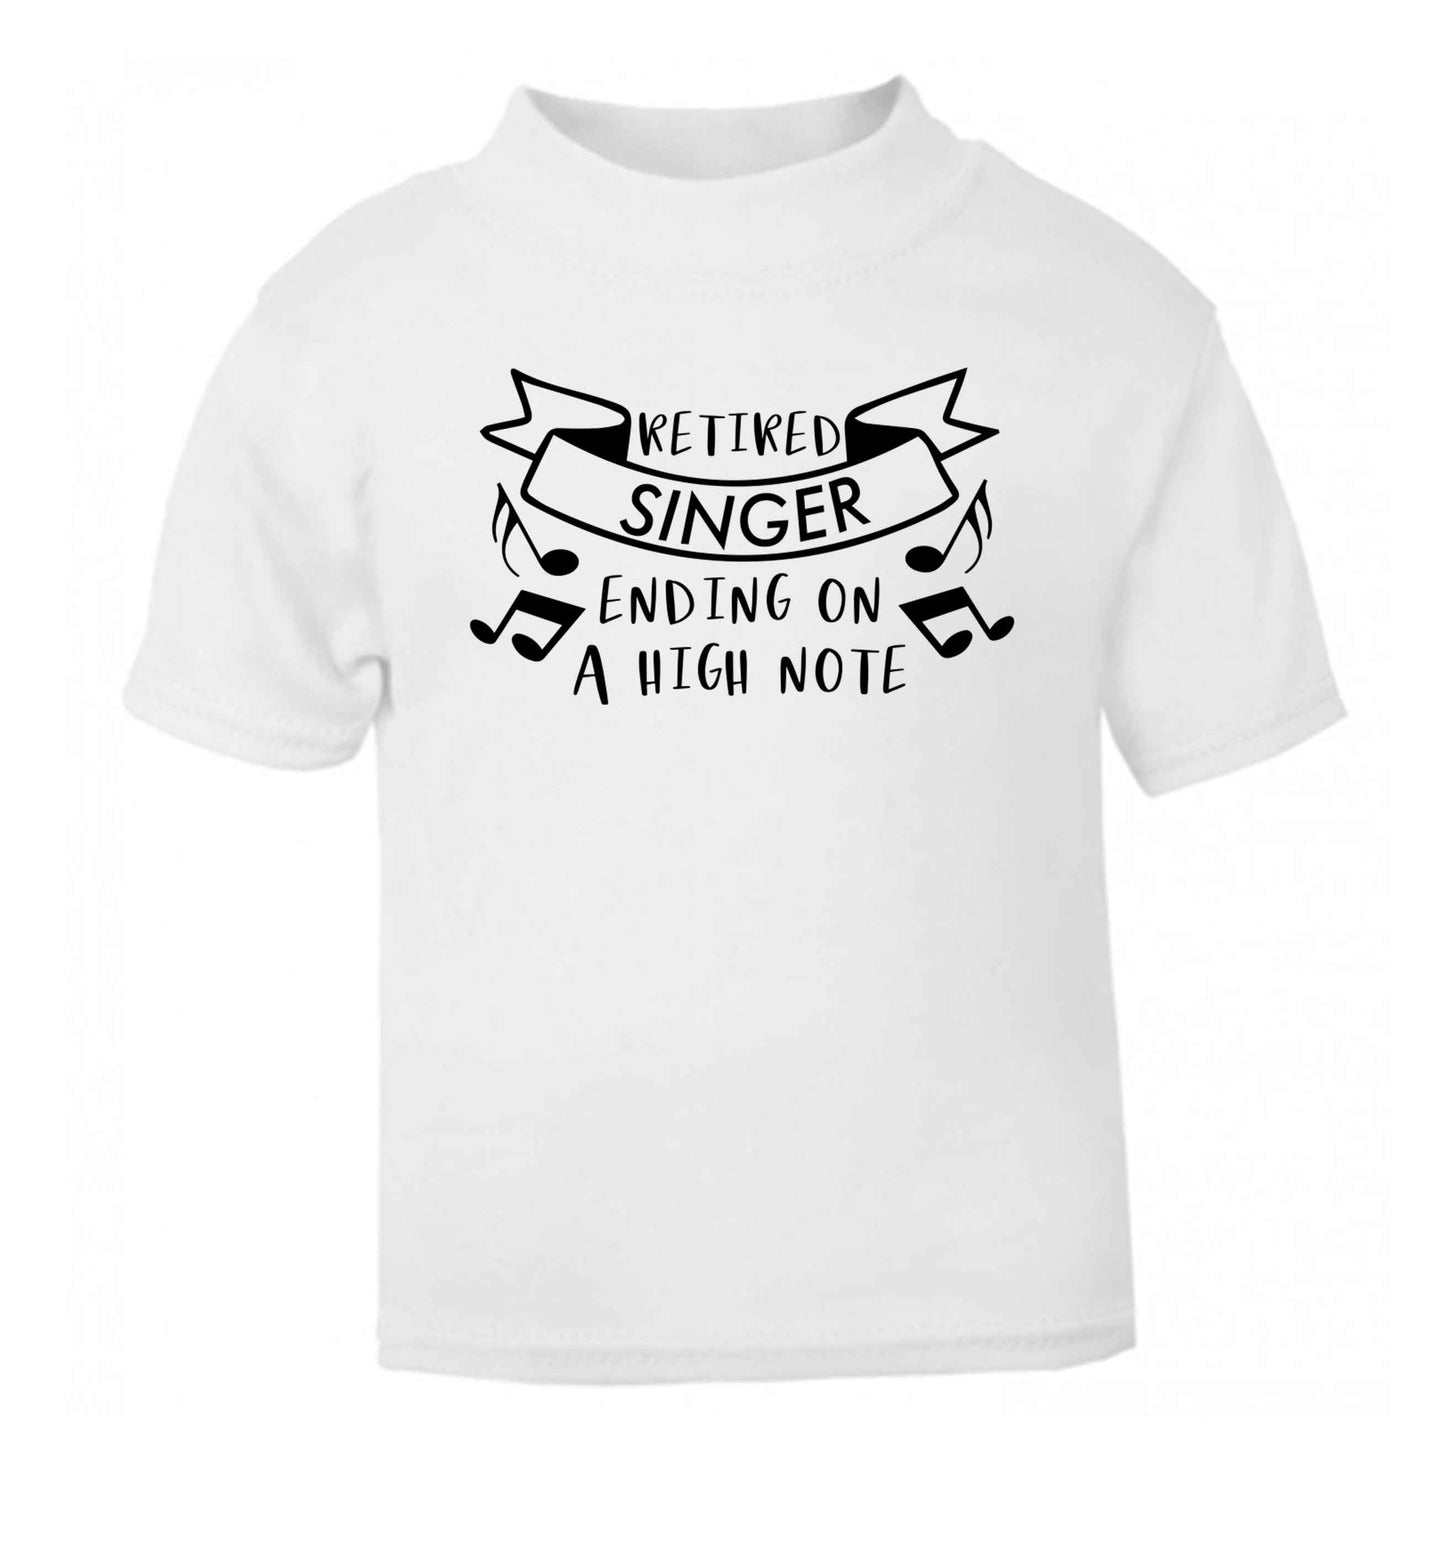 Retired singer ending on a high note white Baby Toddler Tshirt 2 Years